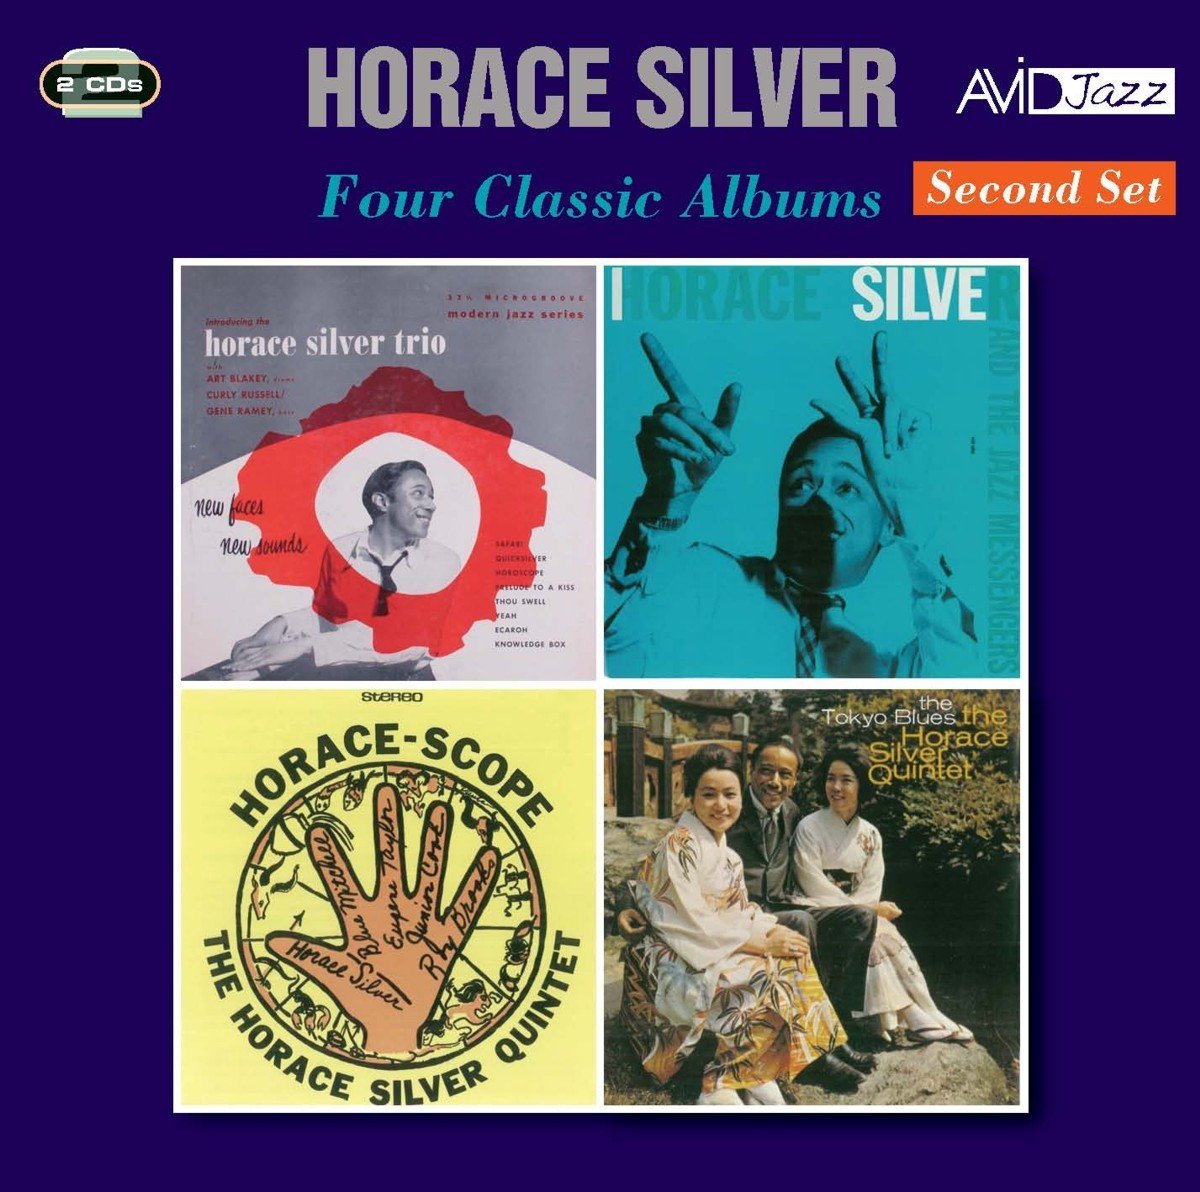 HORACE SILVER - Four Classic Albums (New Faces New Sounds / Horace Silver & The Jazz Messengers / Horace-Scope / The Tokyo Blues) cover 